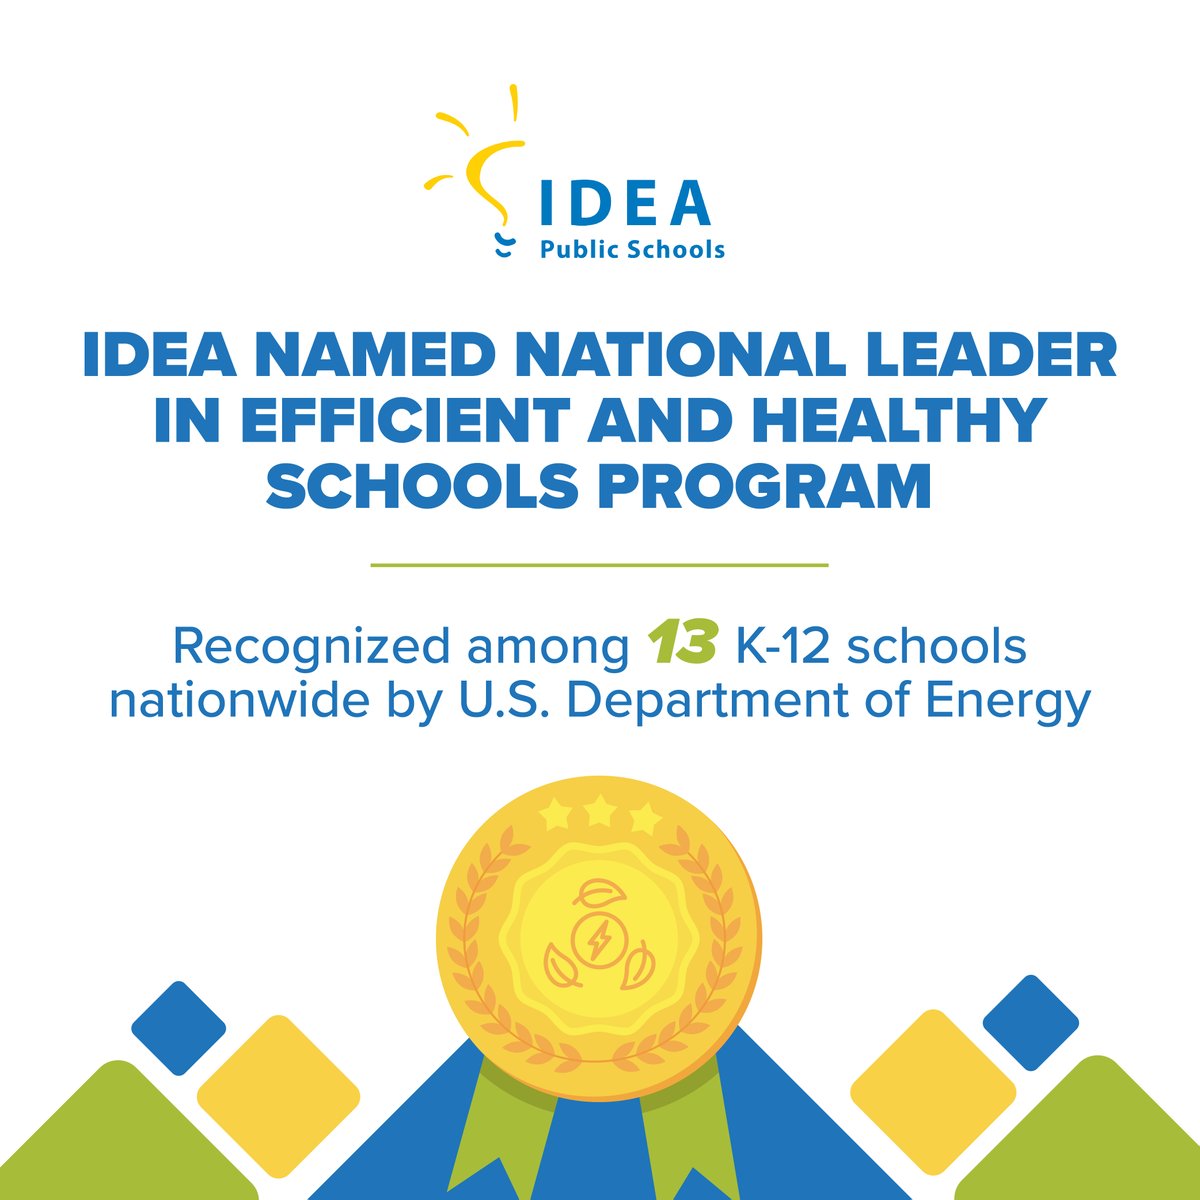 IDEA is among the 13 K-12 schools nationwide to be celebrated by @energy @epa and @usedgov as part of the Efficient and Healthy Schools Program (EHSP). 👏 🌟Read more about this national recognition in our latest blog: bit.ly/44qRDDp.